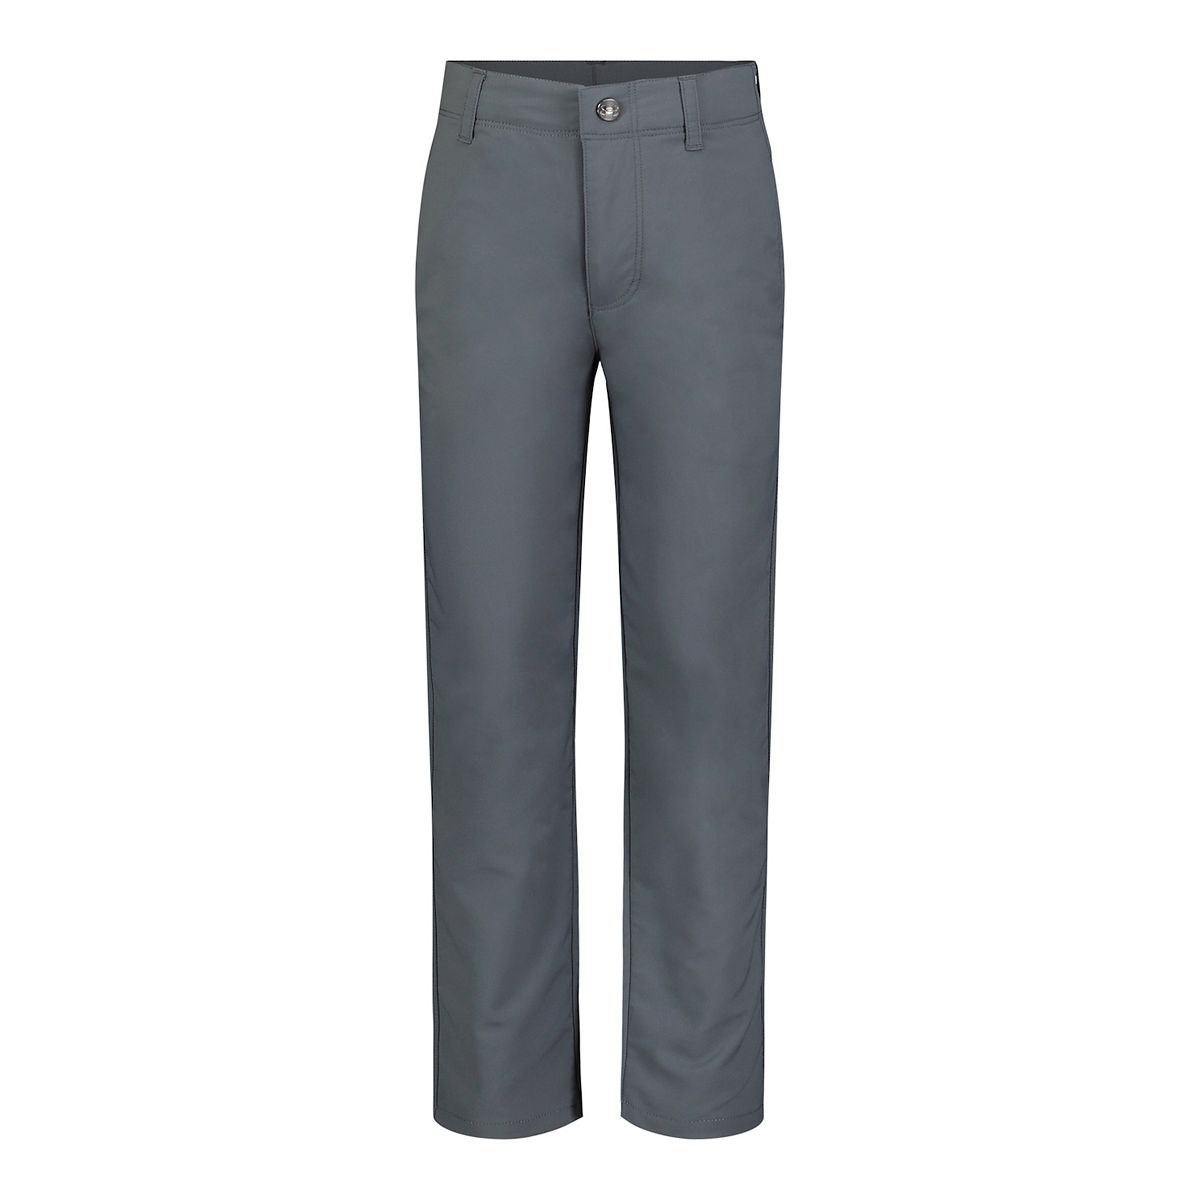 Under Armour Boys' UA Match Play Tapered Pant - Pitch Gray